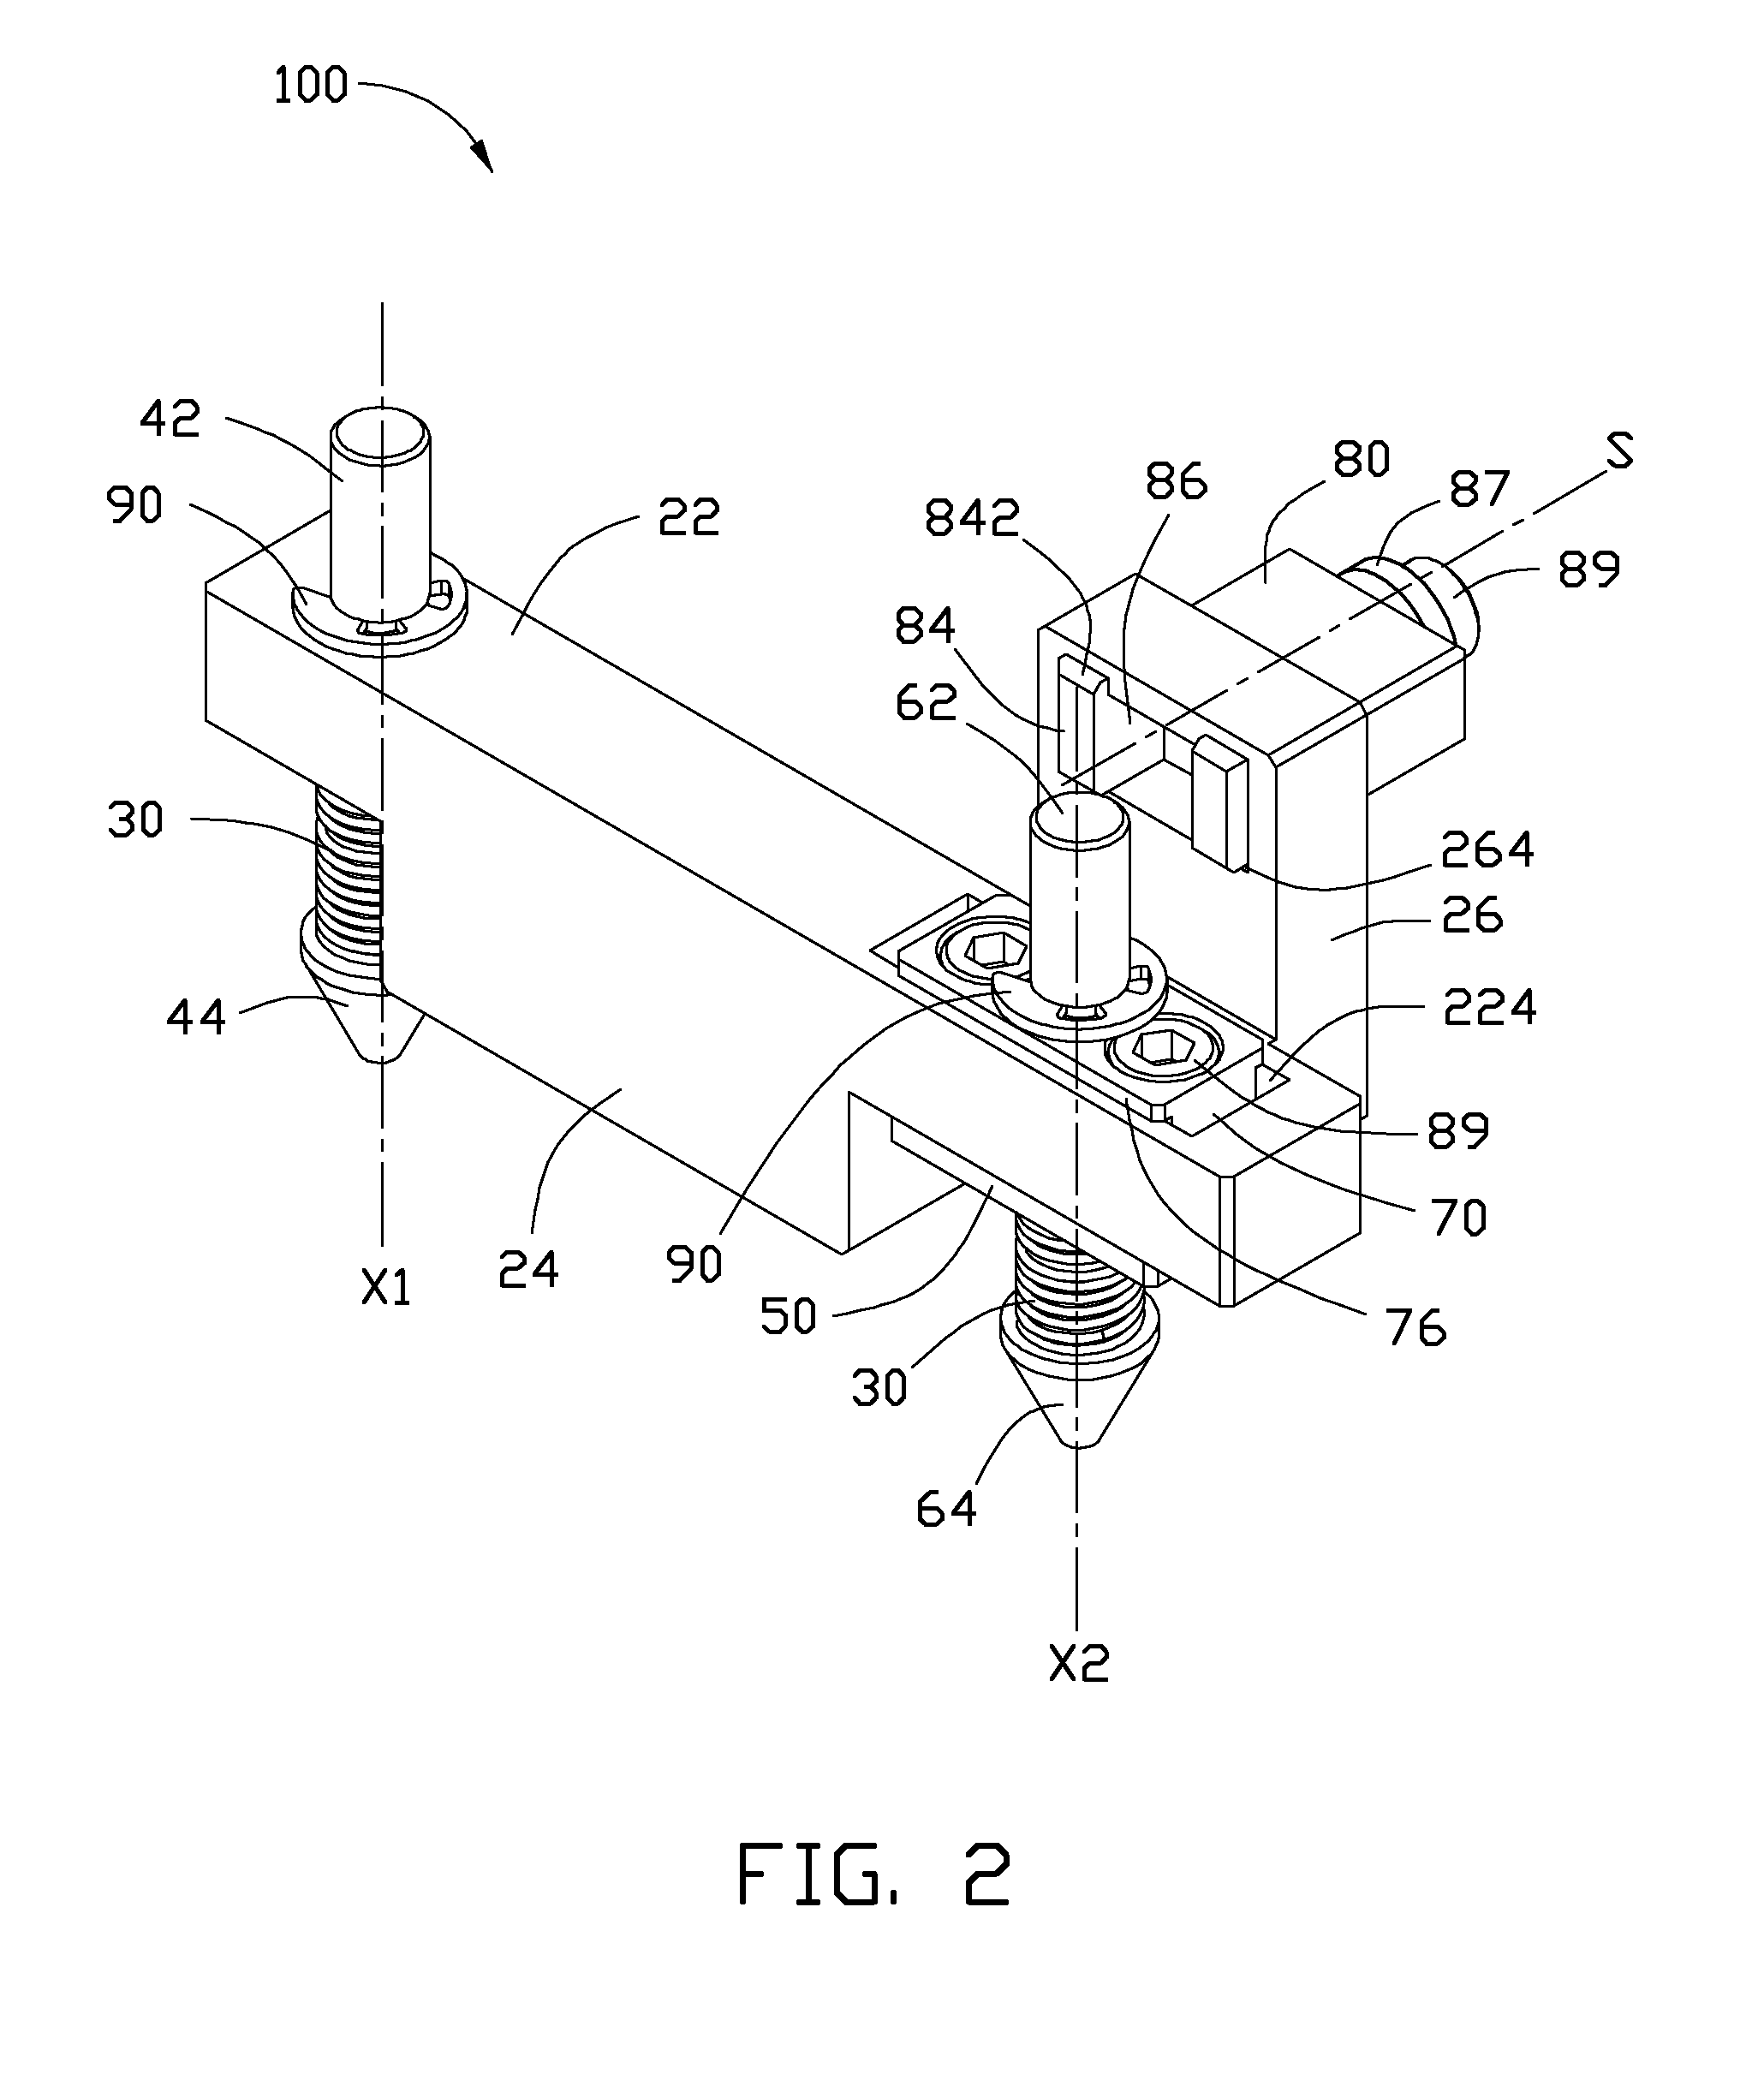 Test device for testing distance between centers of two through holes